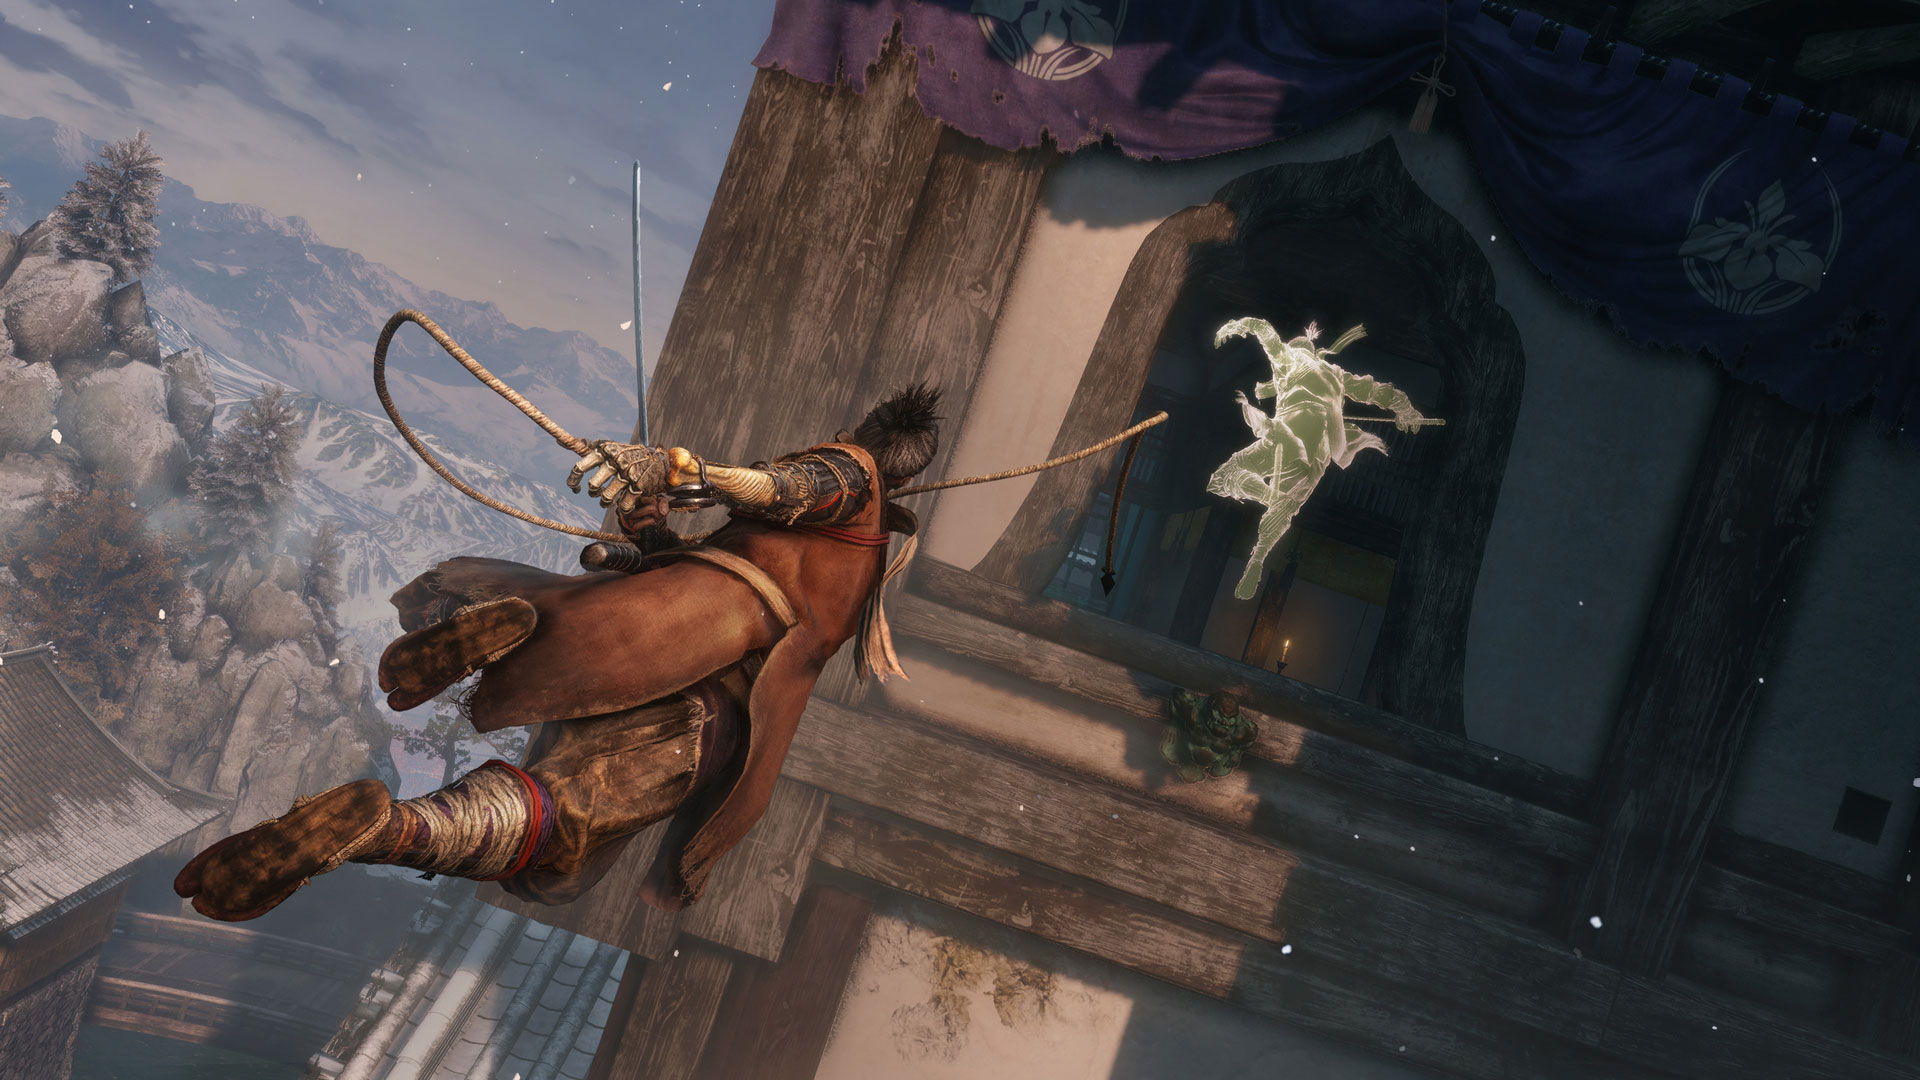 Sekiro: Shadows Die Twice Sold Over 5 Million Copies, Free Update Coming October 29